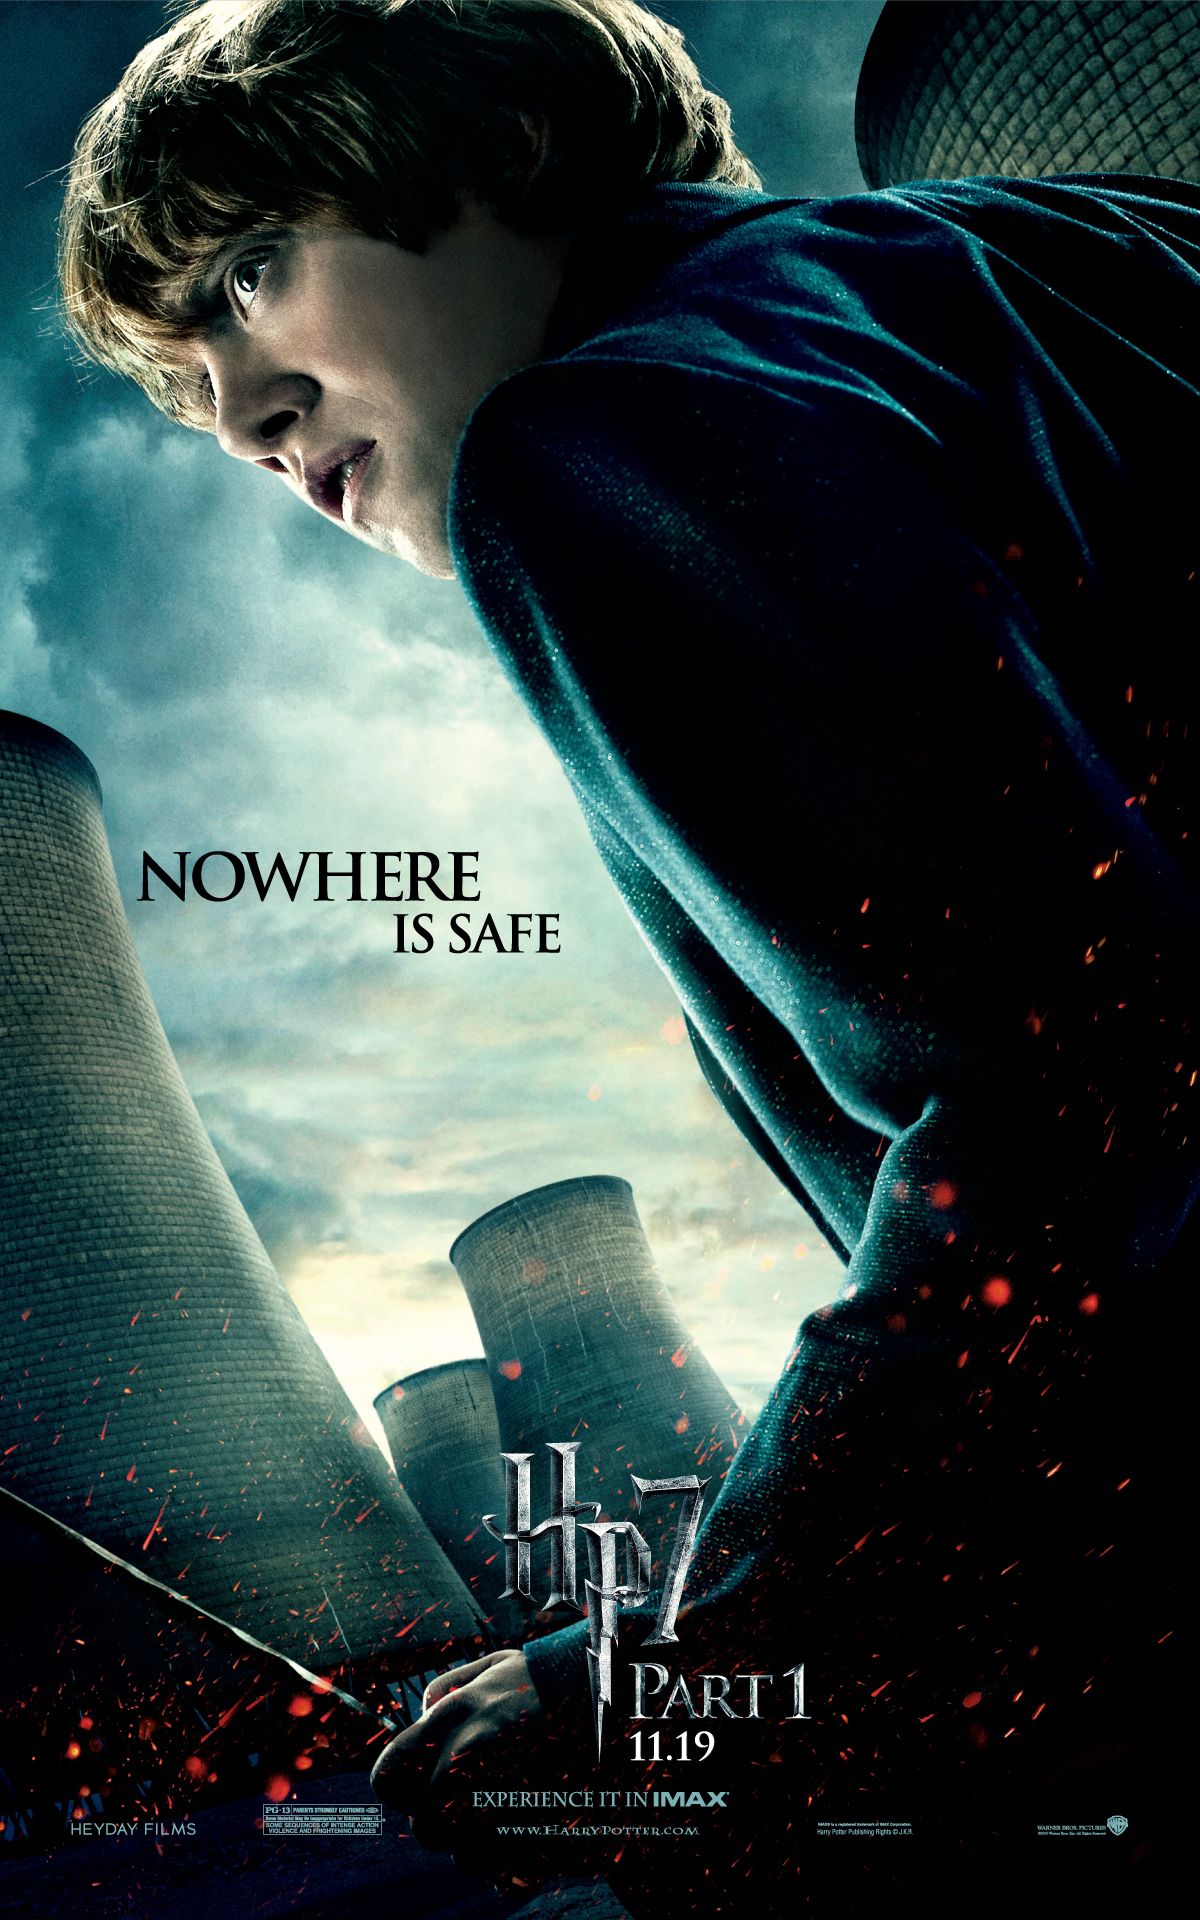 Harry Potter and the Deathly Hallows Character Poster #3